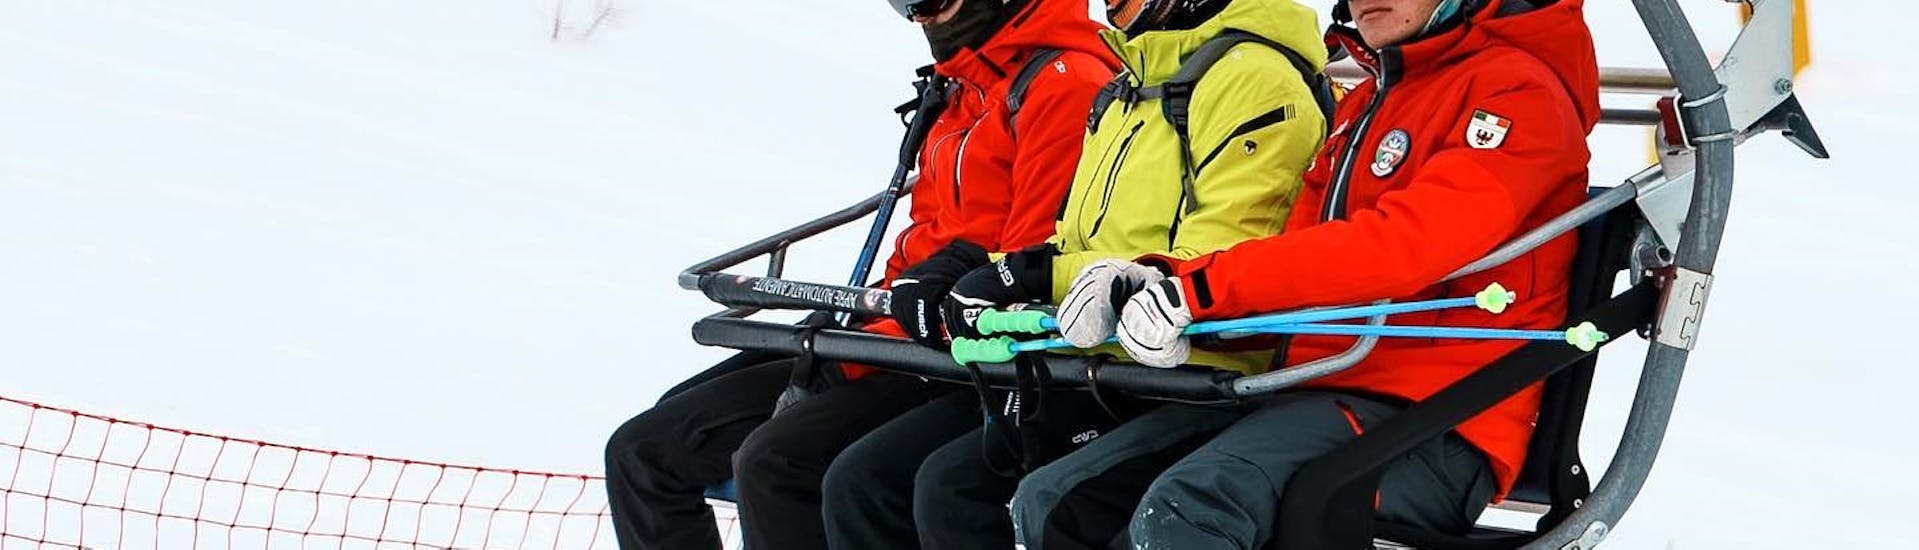 Junior Ski Lessons (14-18 y.) for All Levels | Special.